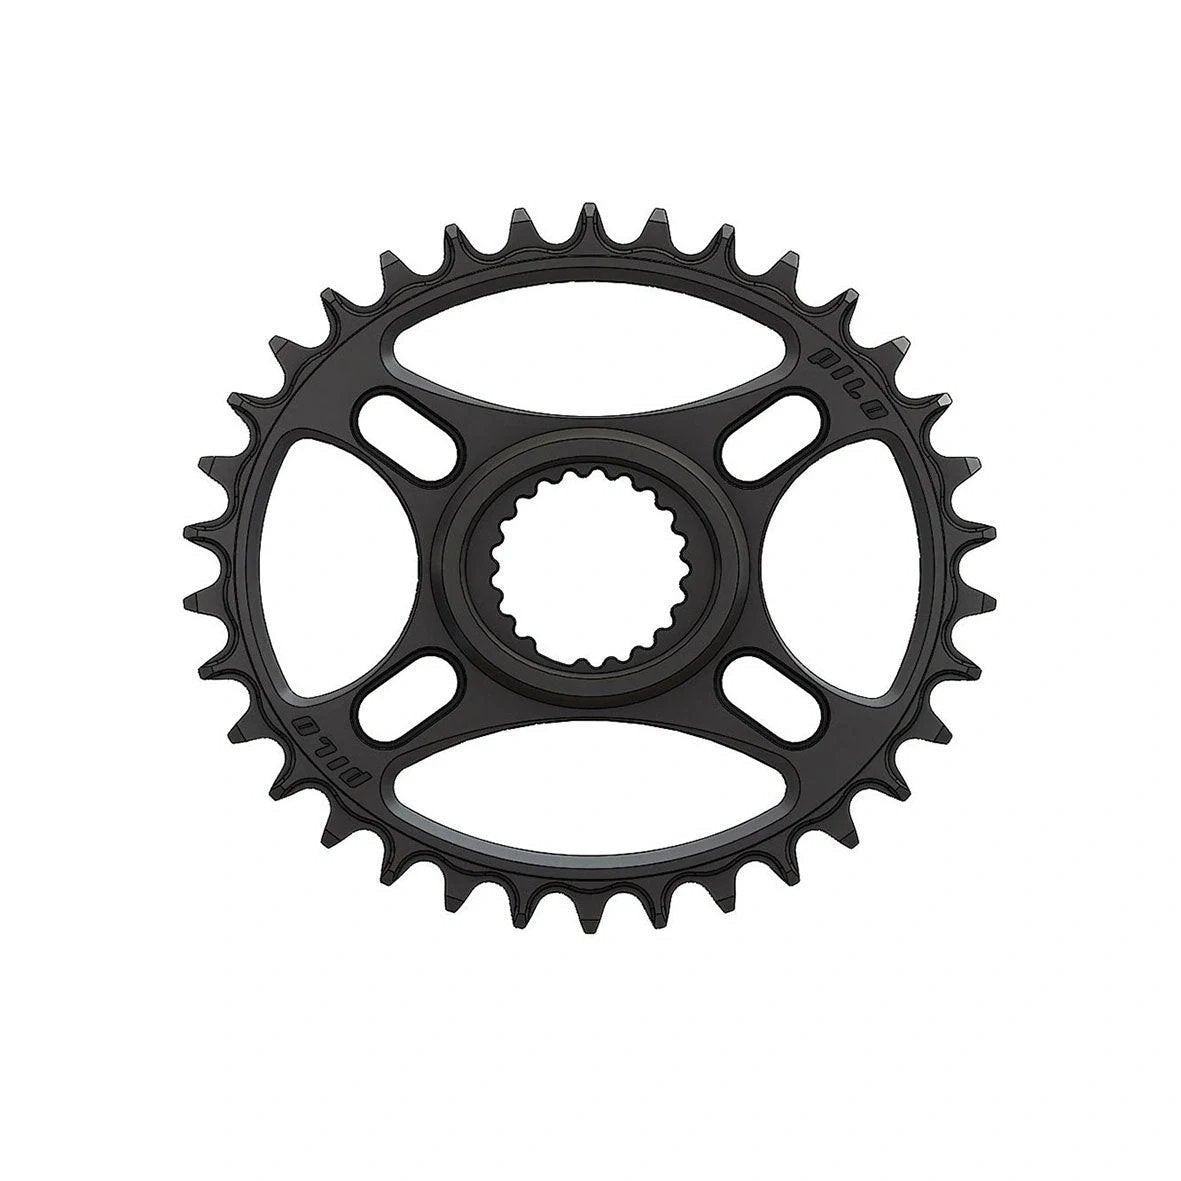 Pilo 34T Chainring For Shimano Direct Mount Cranks